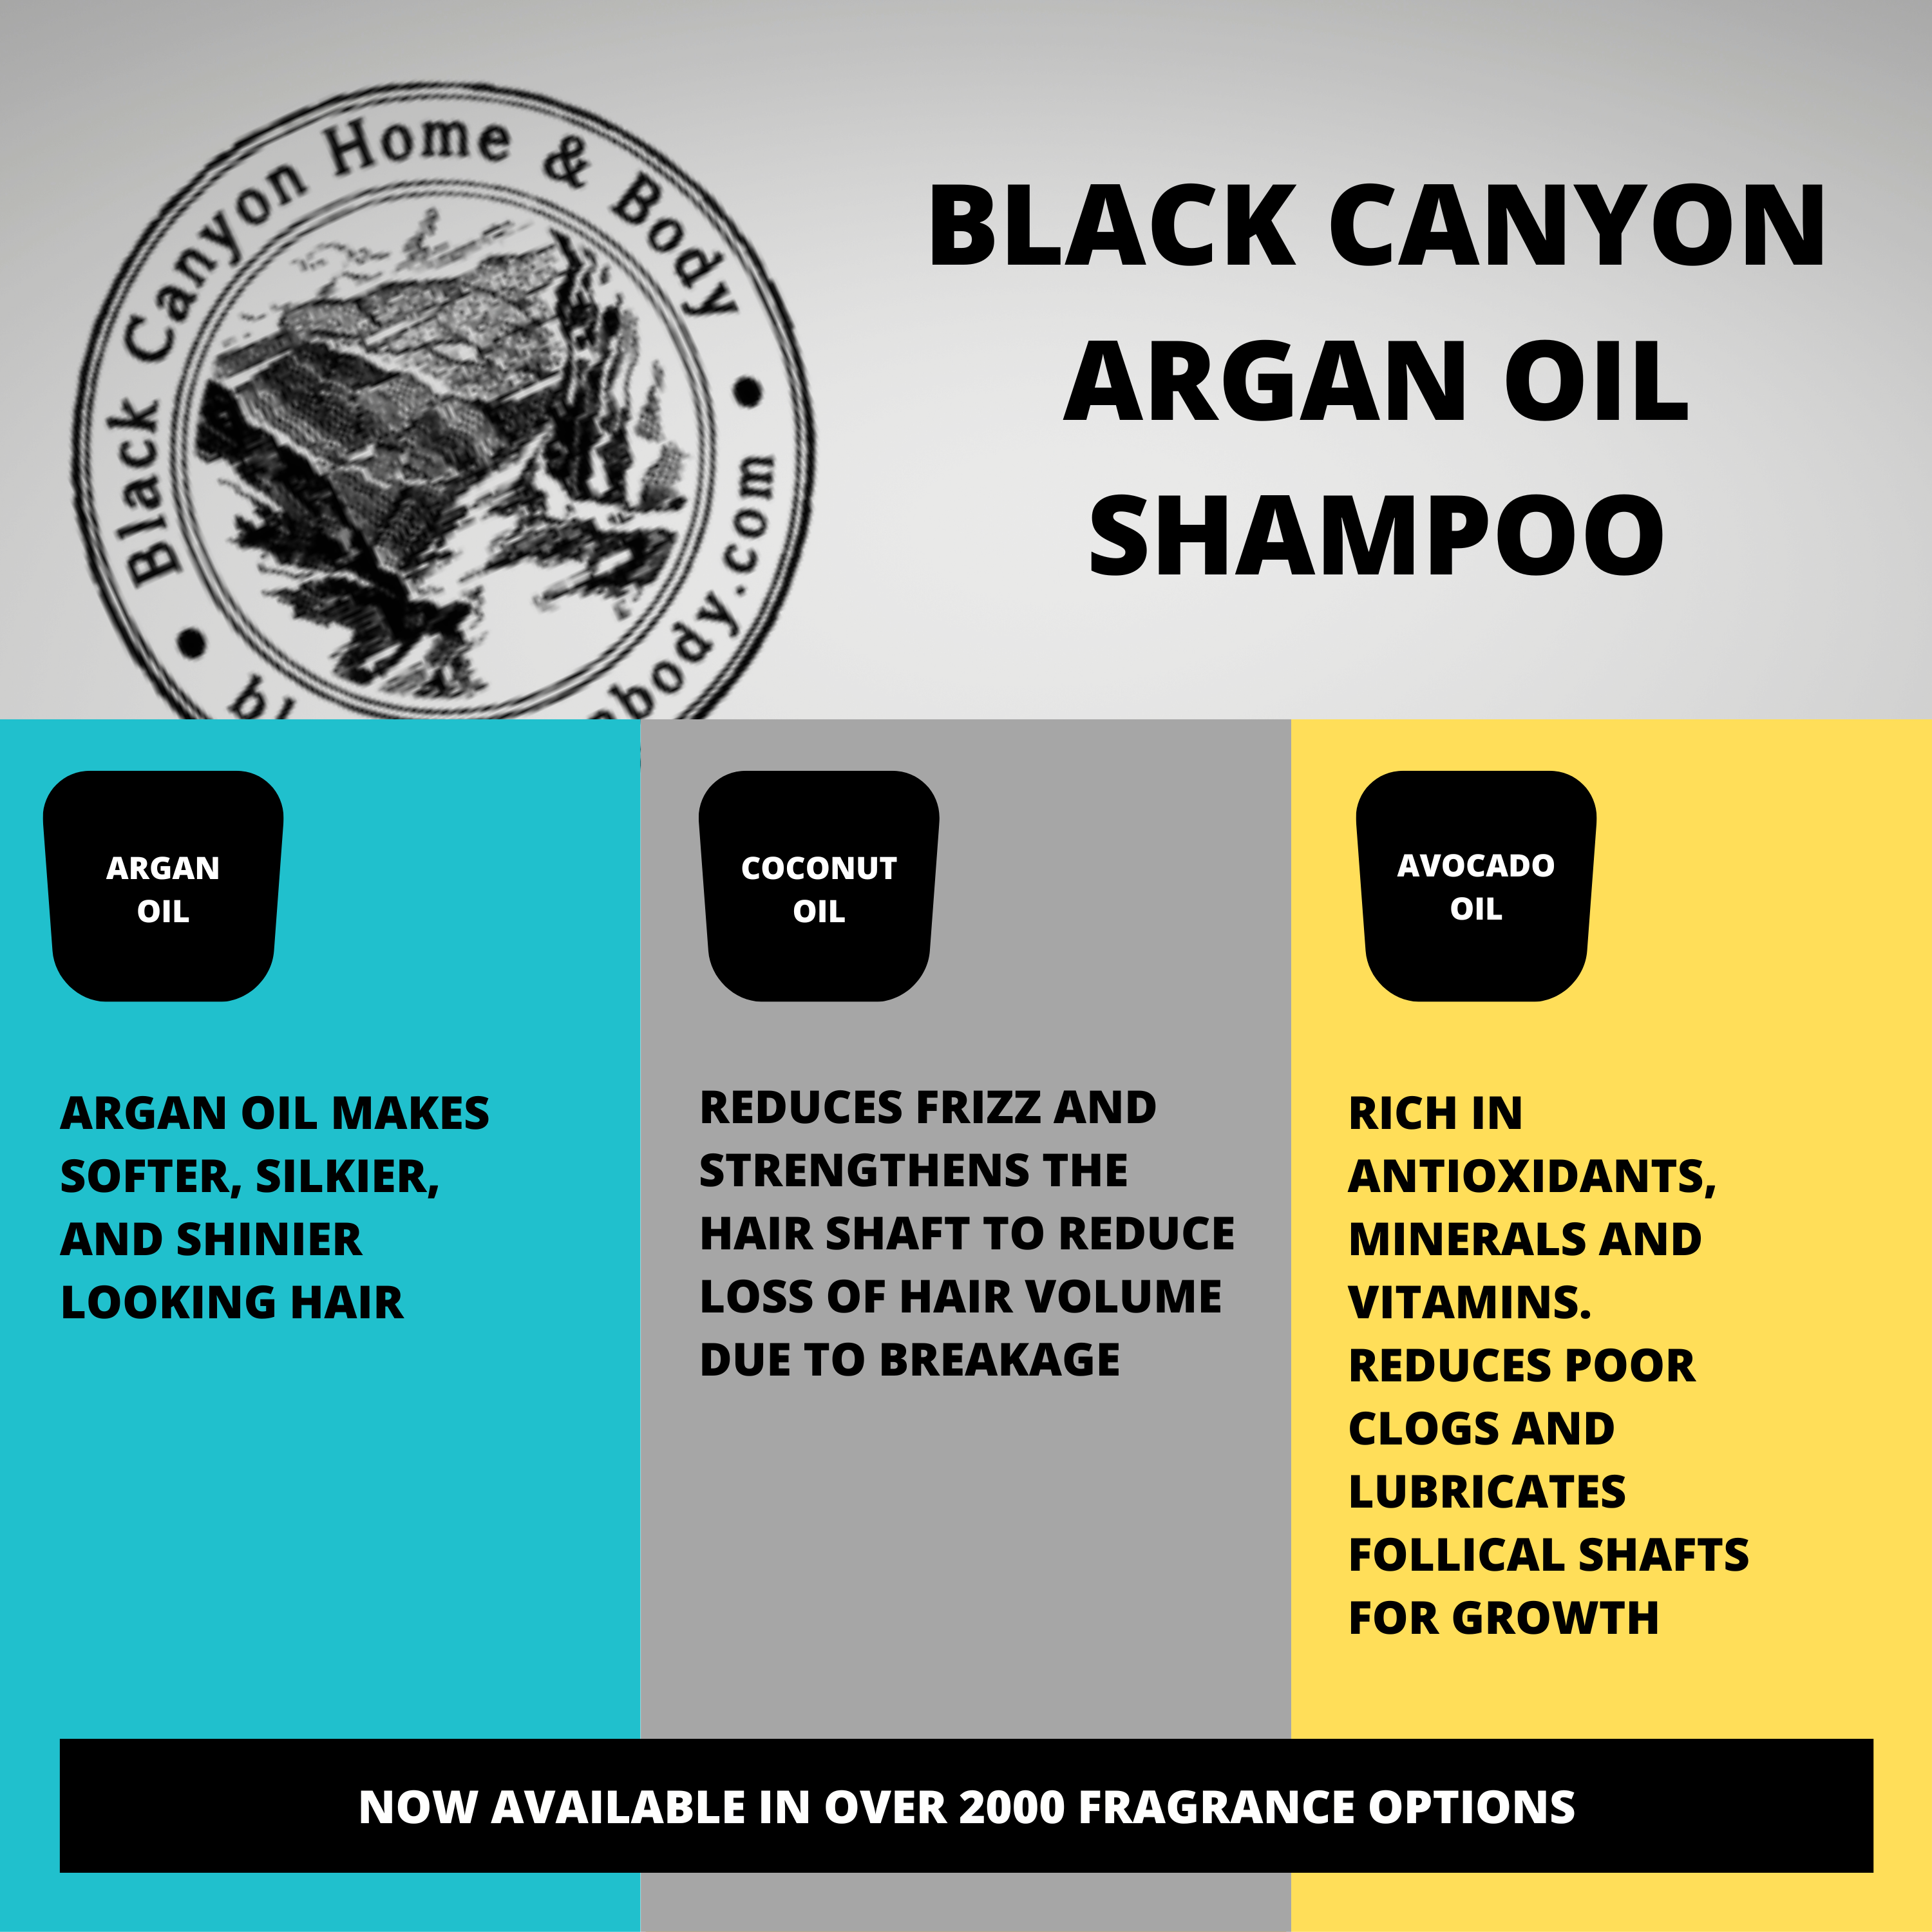 Black Canyon Apricot Mango Scented Shampoo with Argan Oil